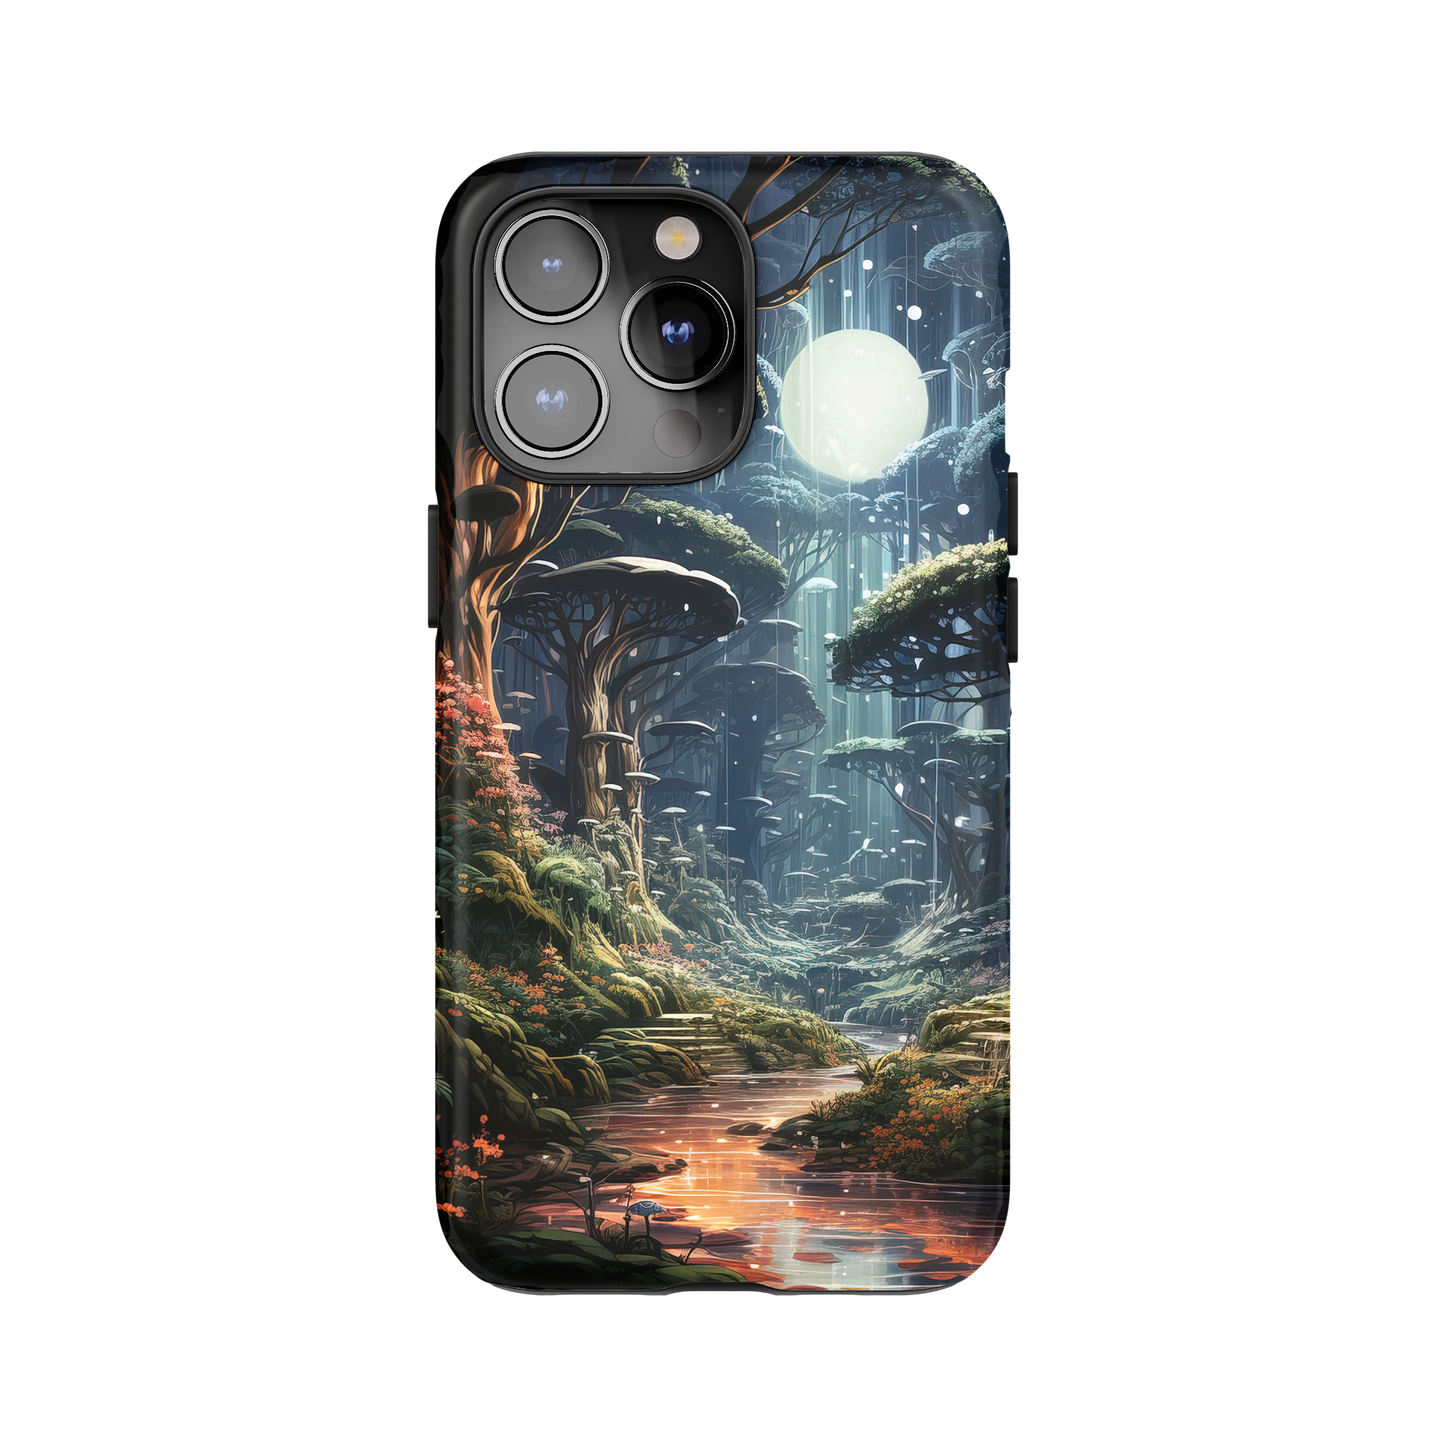 Enchanted Forest Phone Case for iPhone and Samsung